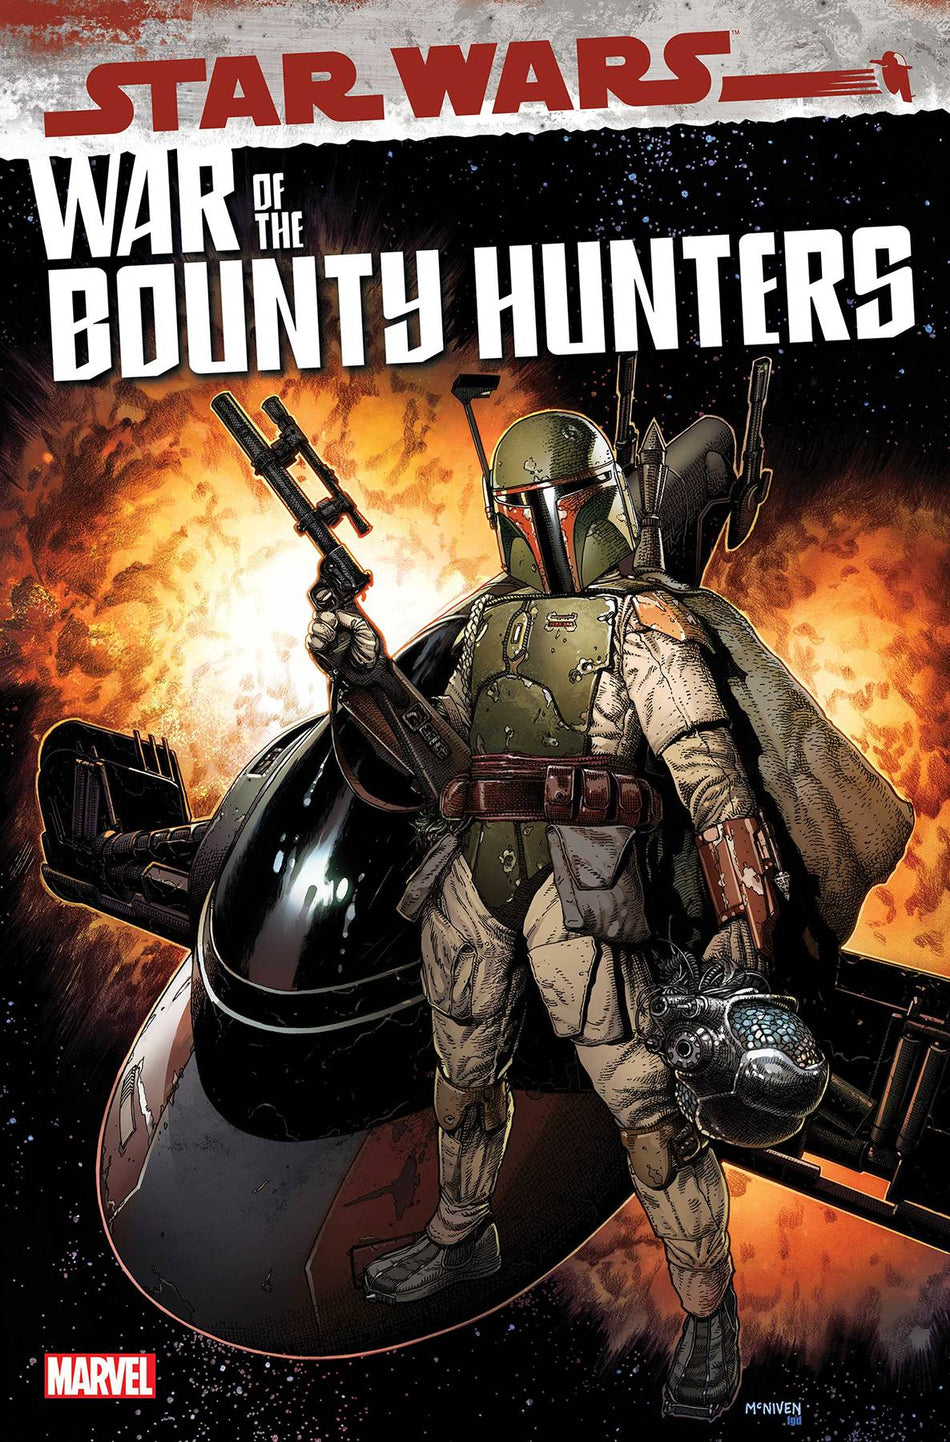 Photo of Star Wars War Bounty Hunters Iss 1 (Of 5) comic sold by Stronghold Collectibles